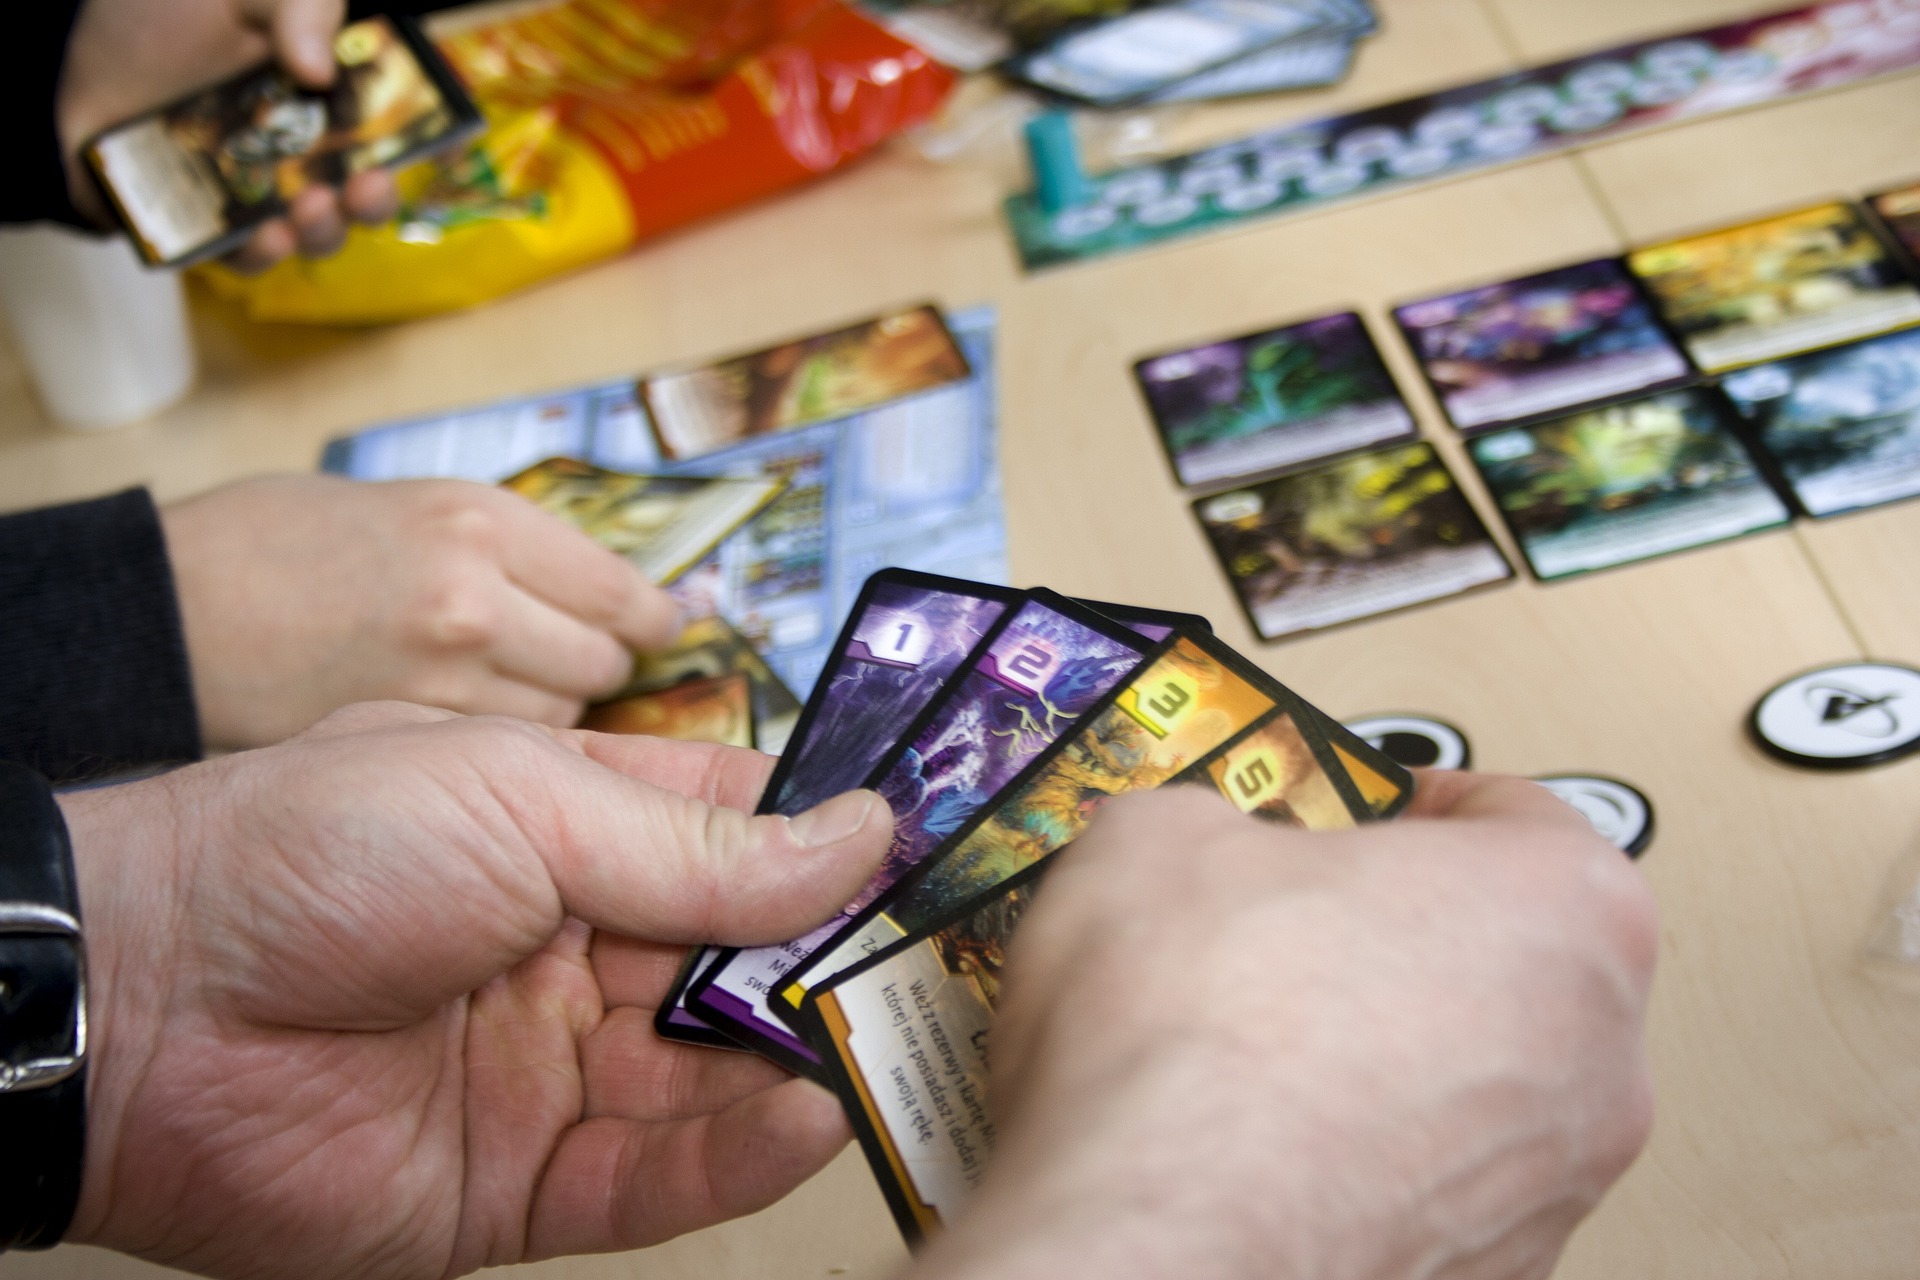 A close up of hands holding gaming cards with more cards on the table in the background.